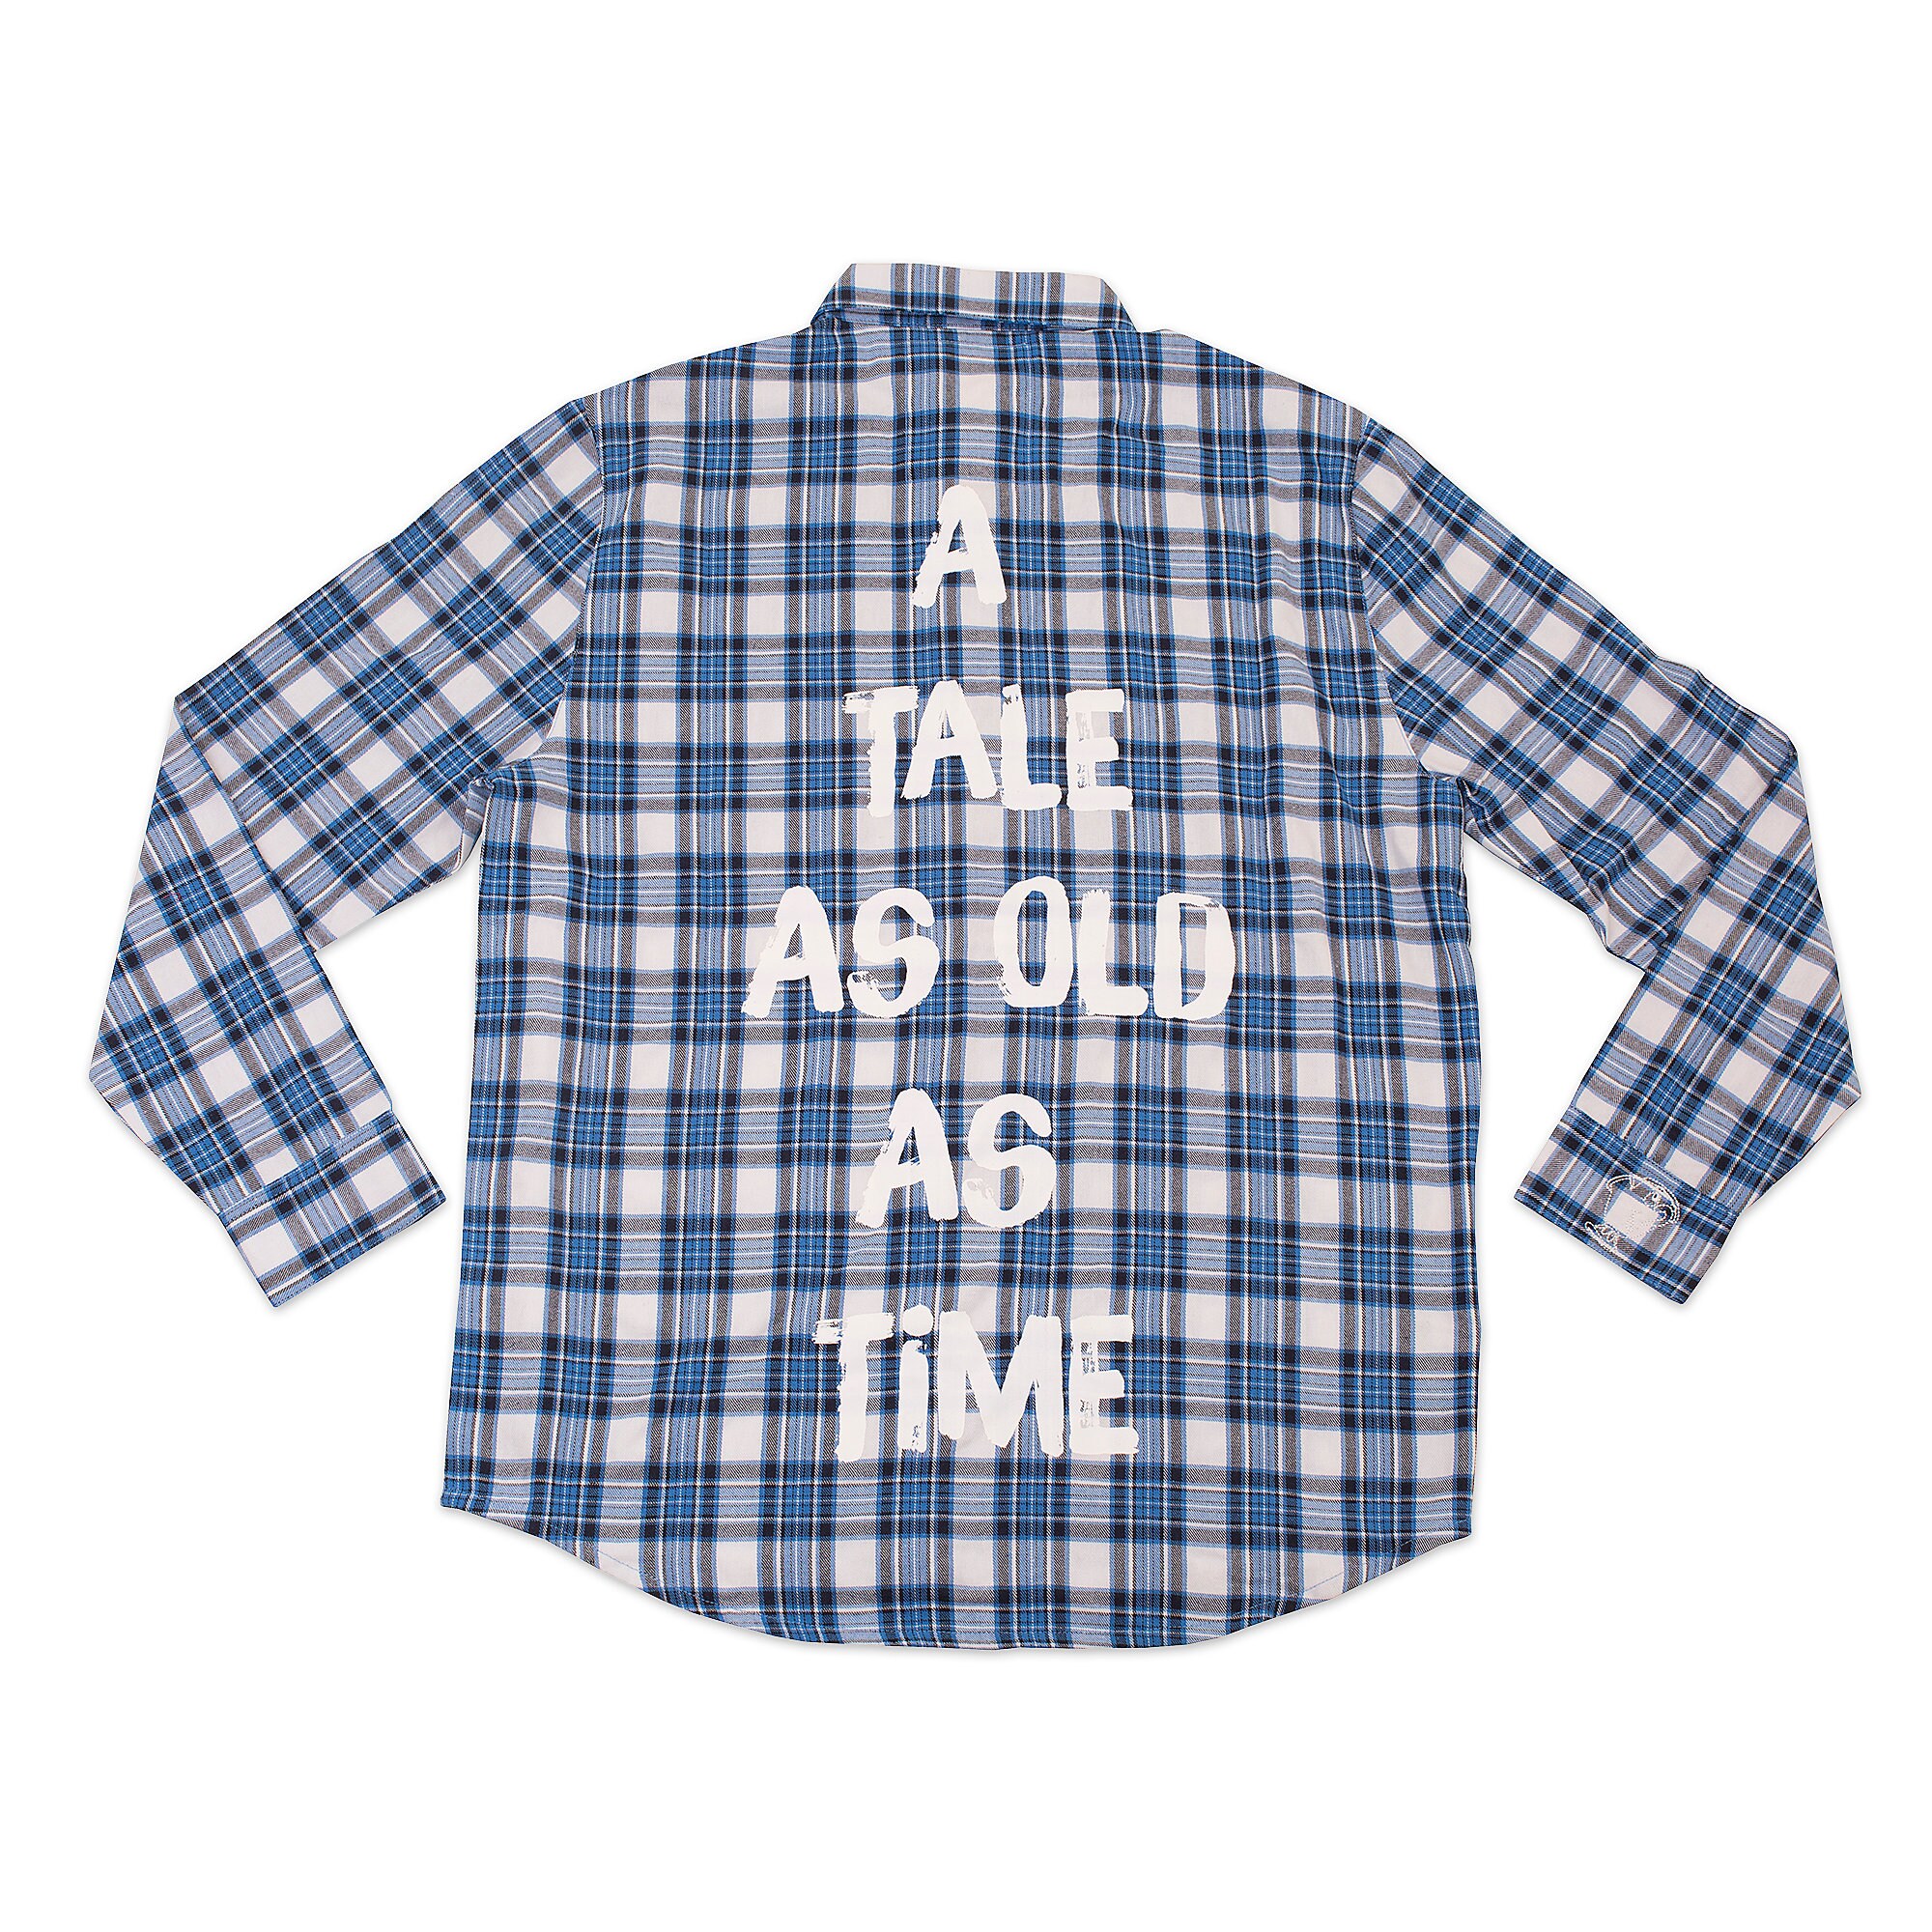 Belle Flannel Shirt for Adults by Cakeworthy